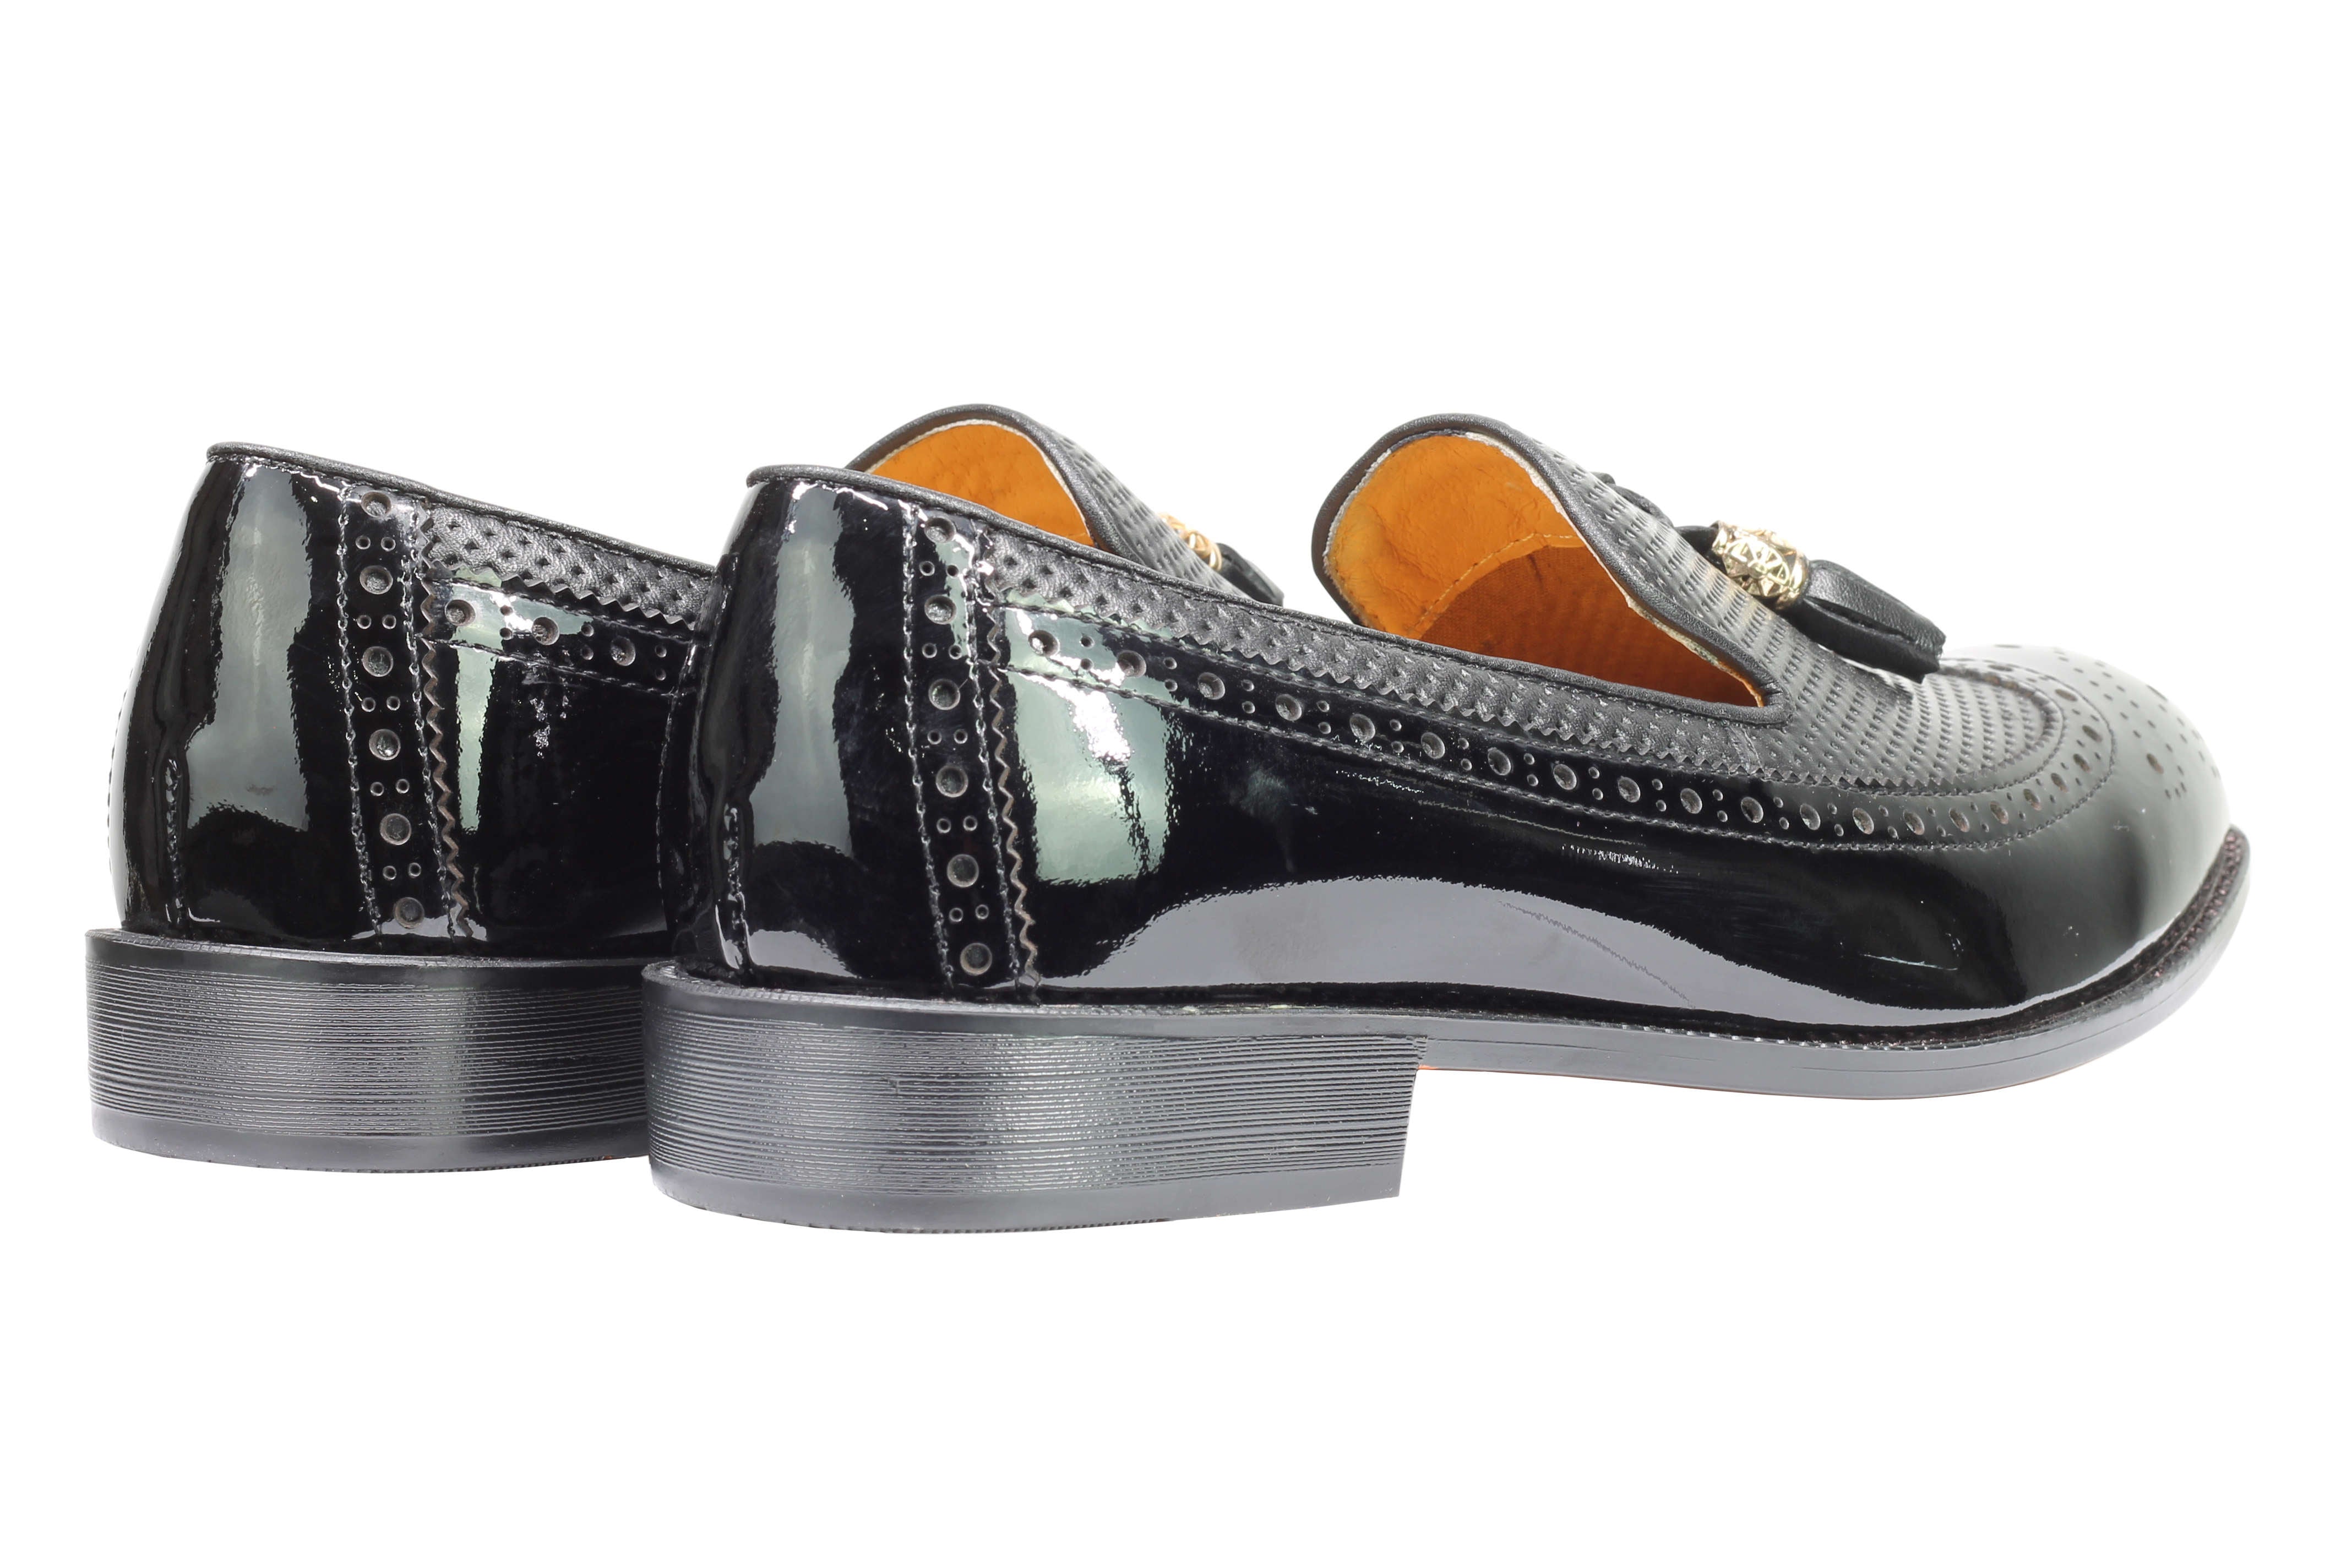 Real Leather Tassel Slip Brogue Loafers